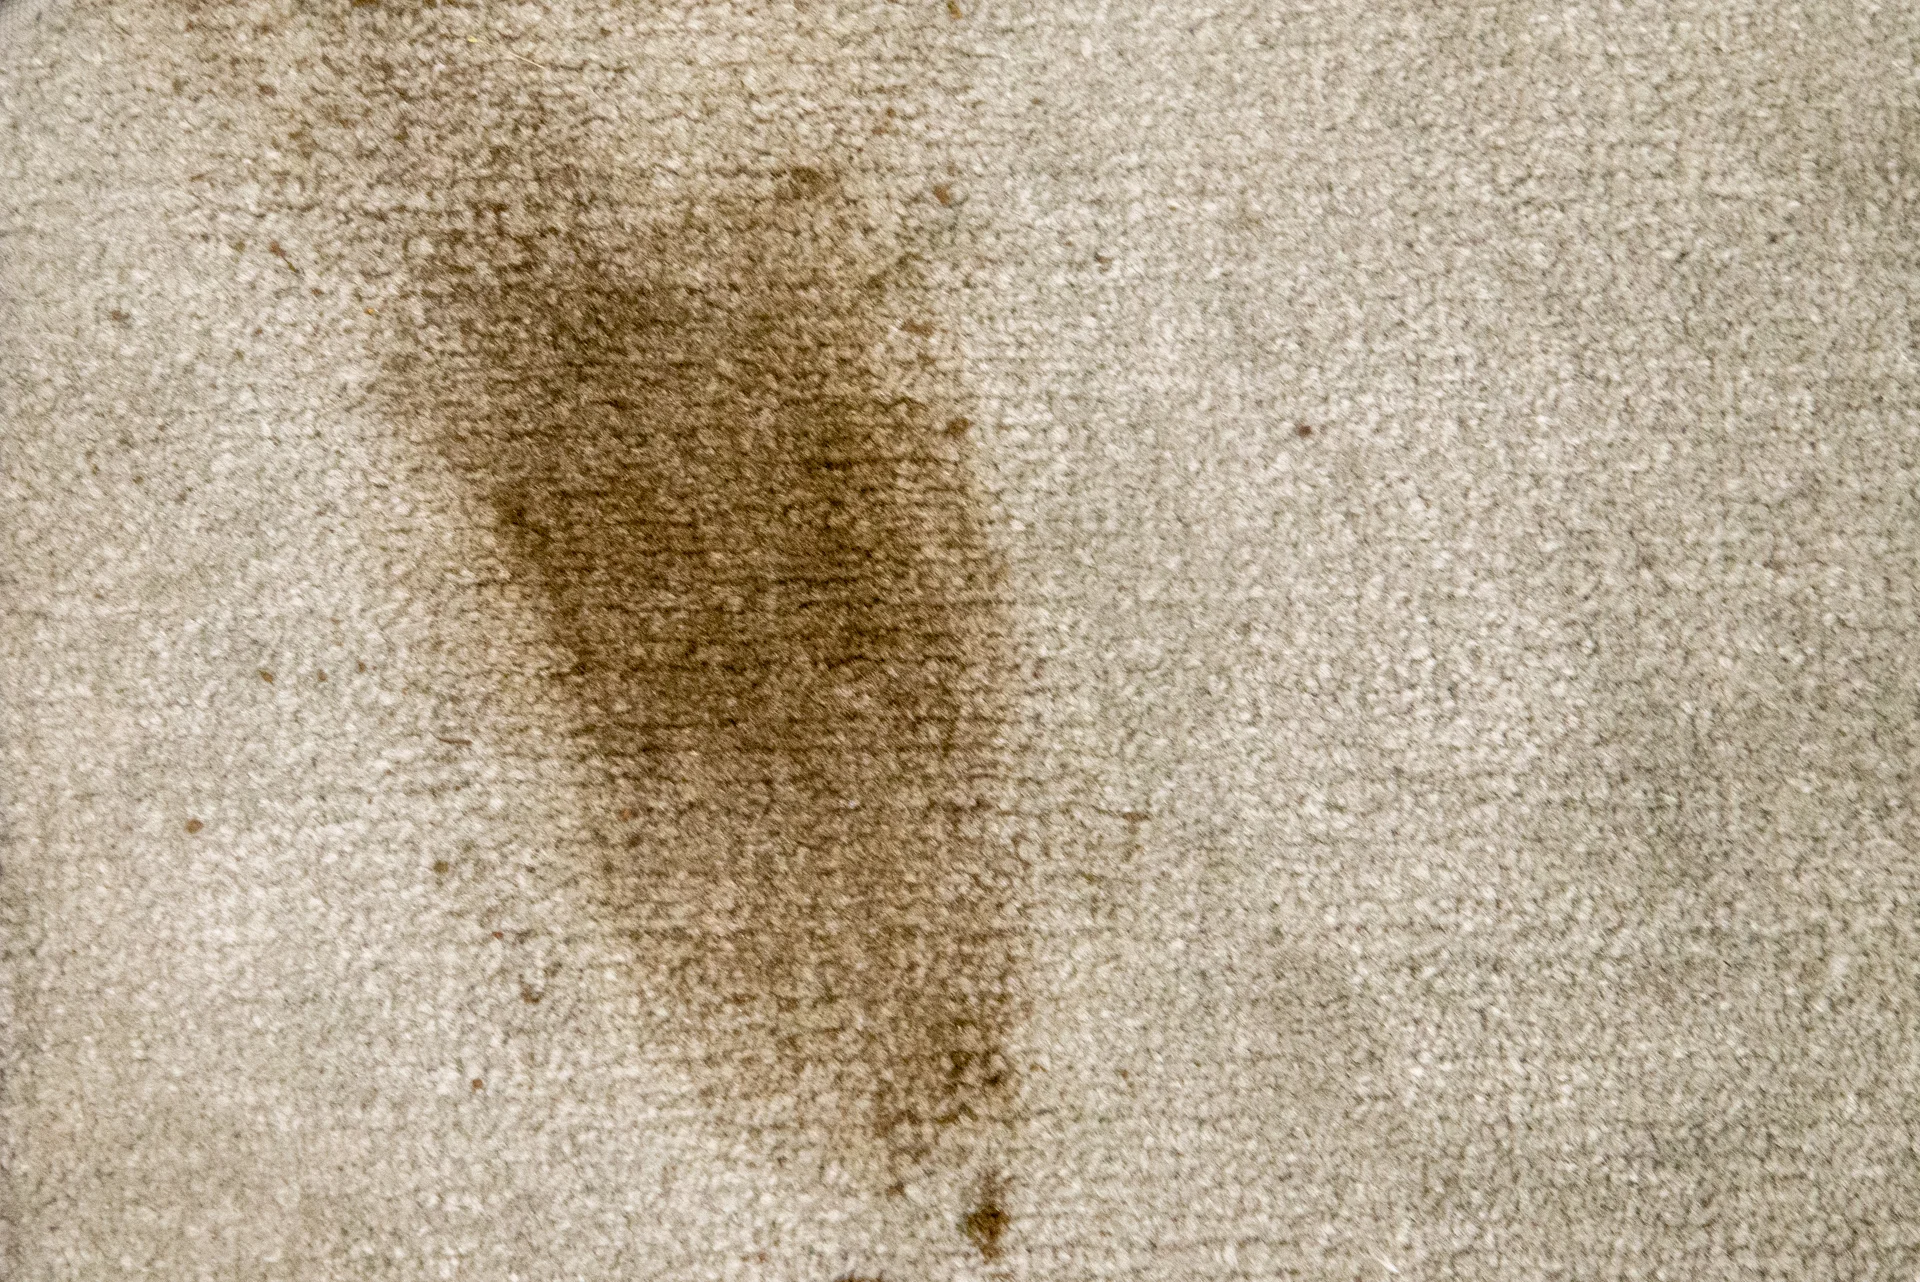 What Is The Preparation And Safety To Remove Coffee Stains?